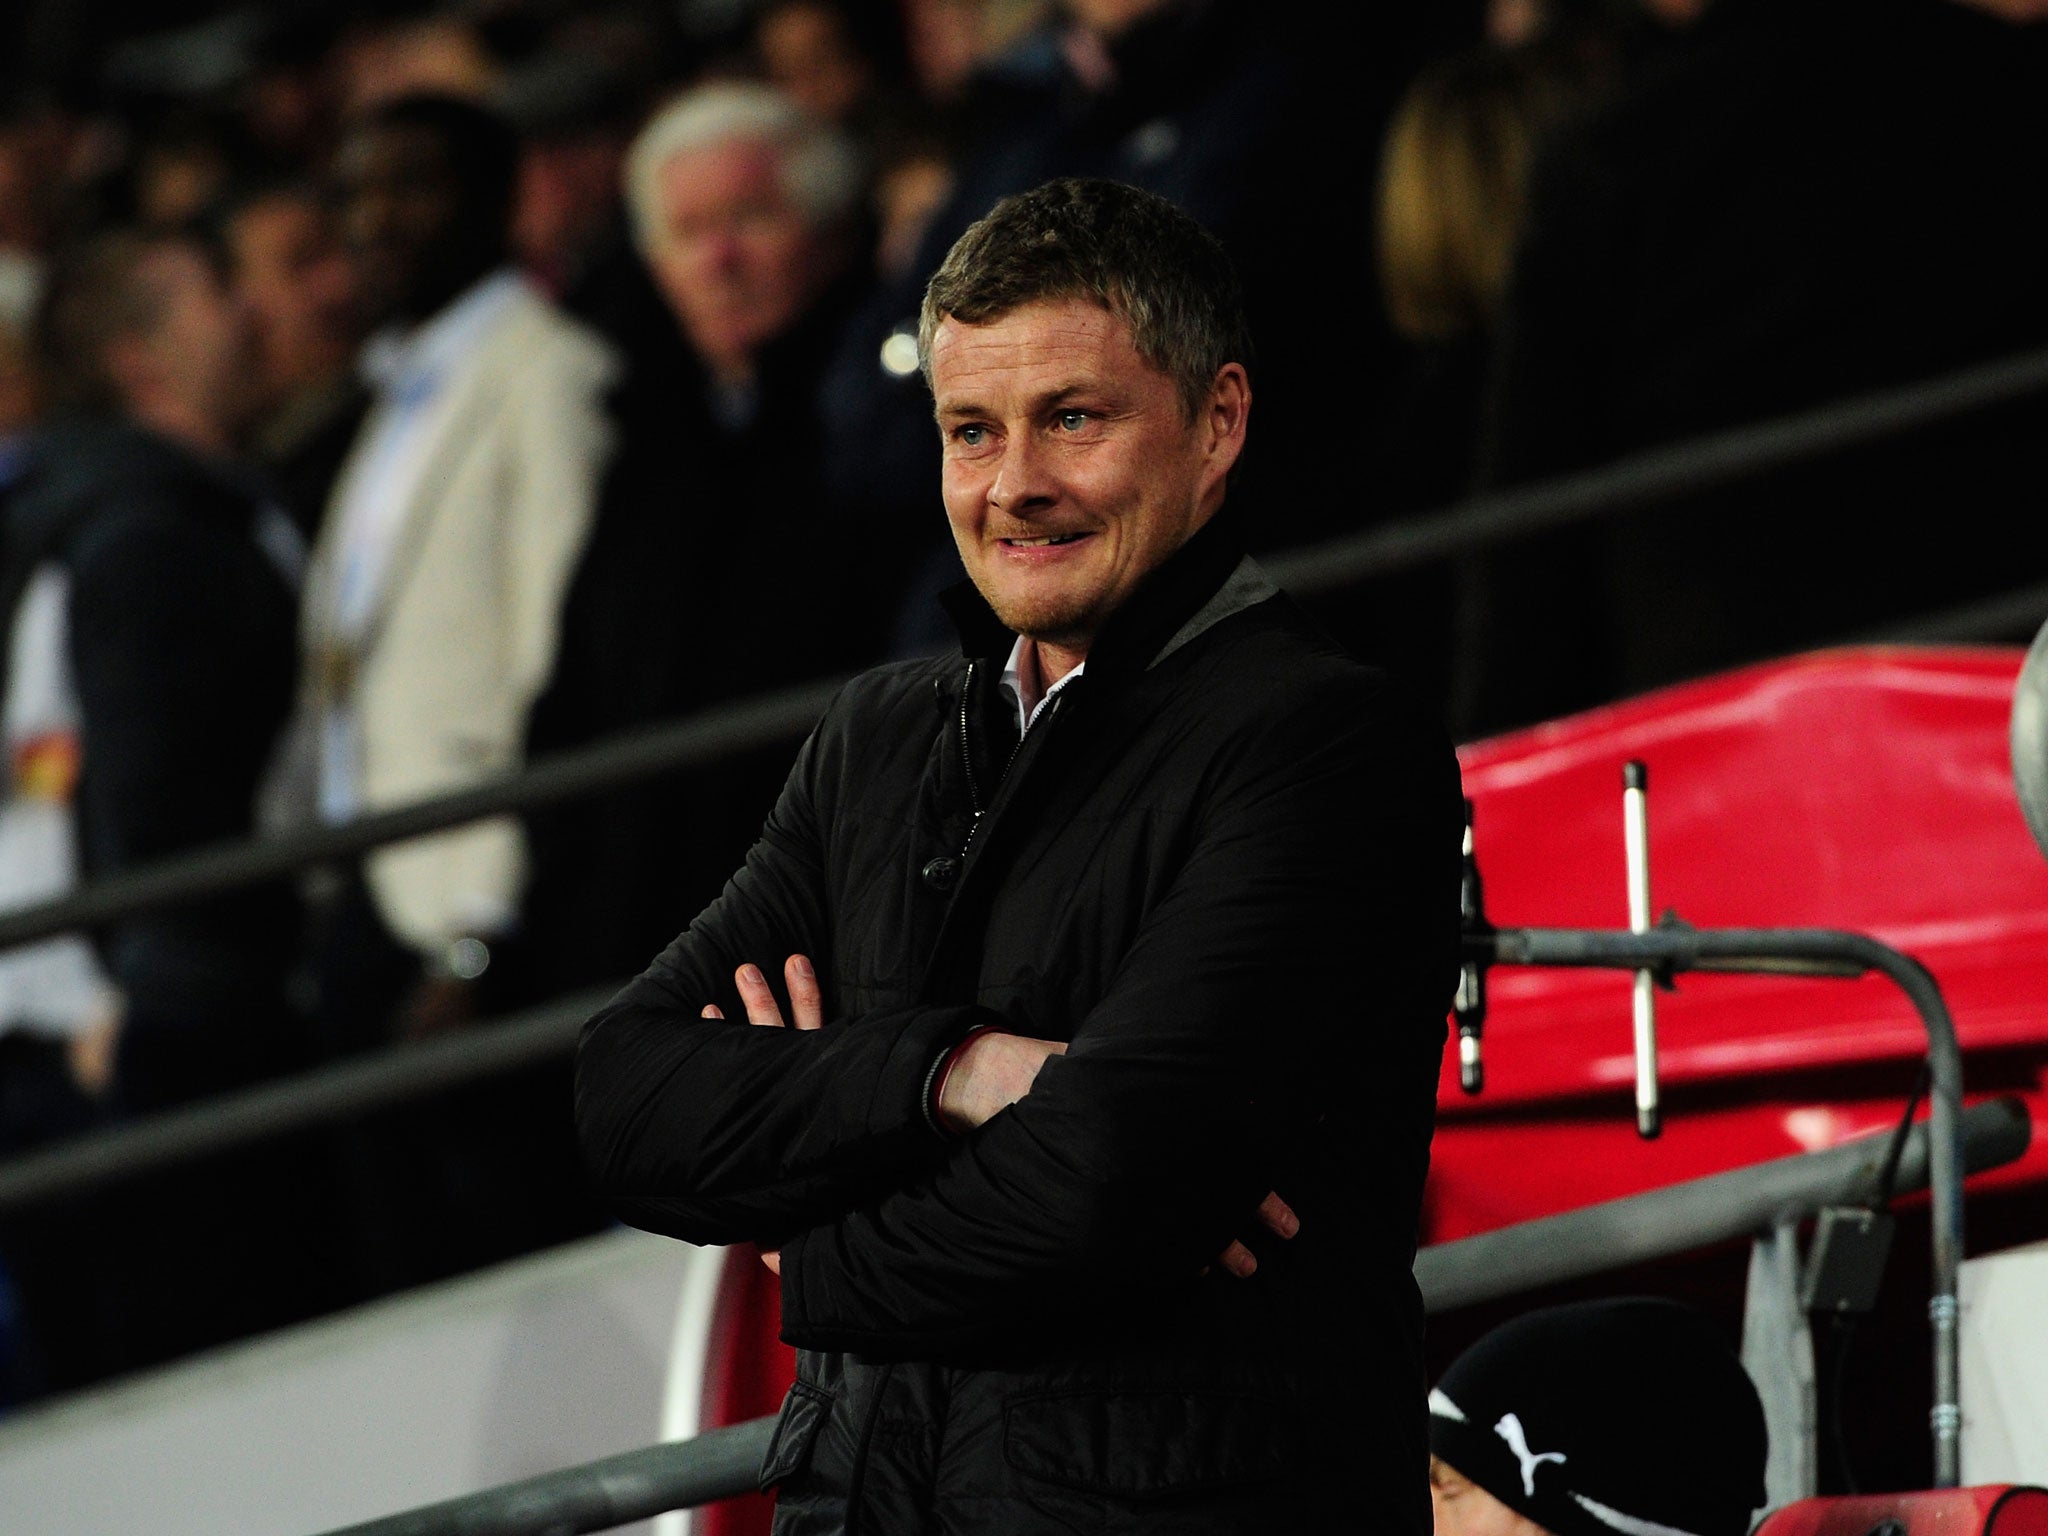 Solskjaer has a chance to turn things around this weekend